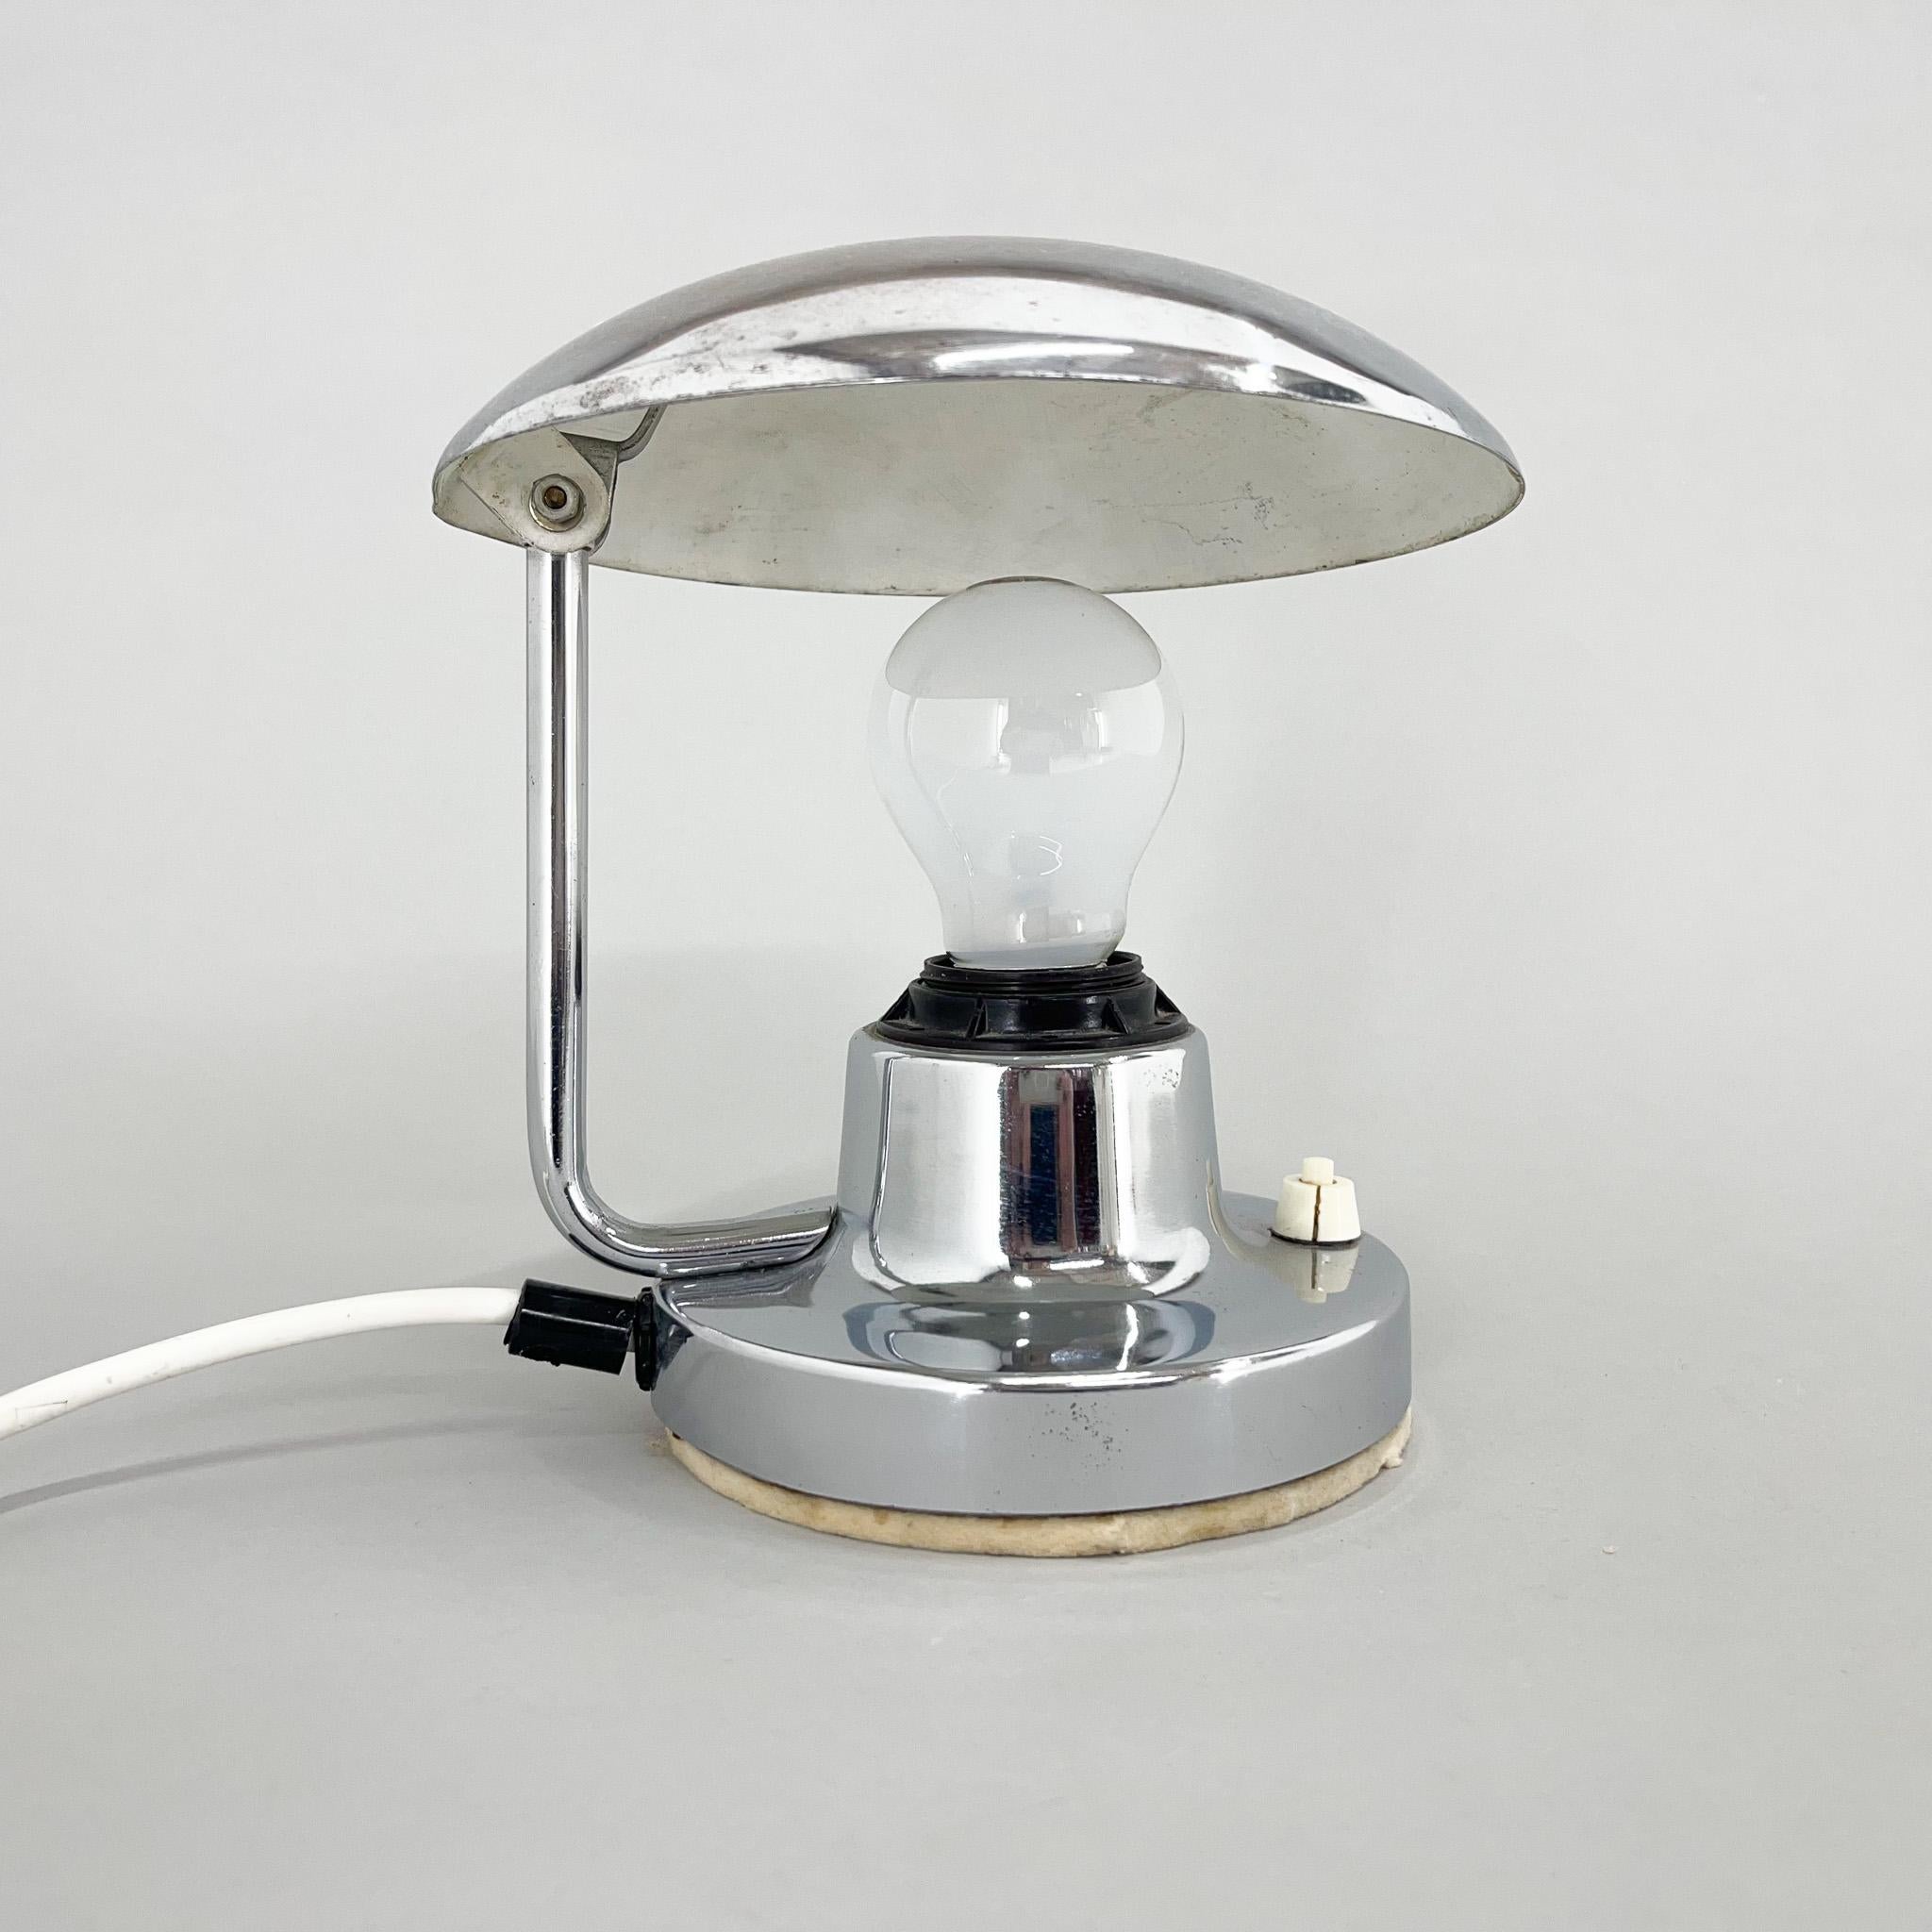 Chrome table lamp with adjustable shade made by famous Napako in 1940s. The lamp shows the wear and tear of time (see photo).